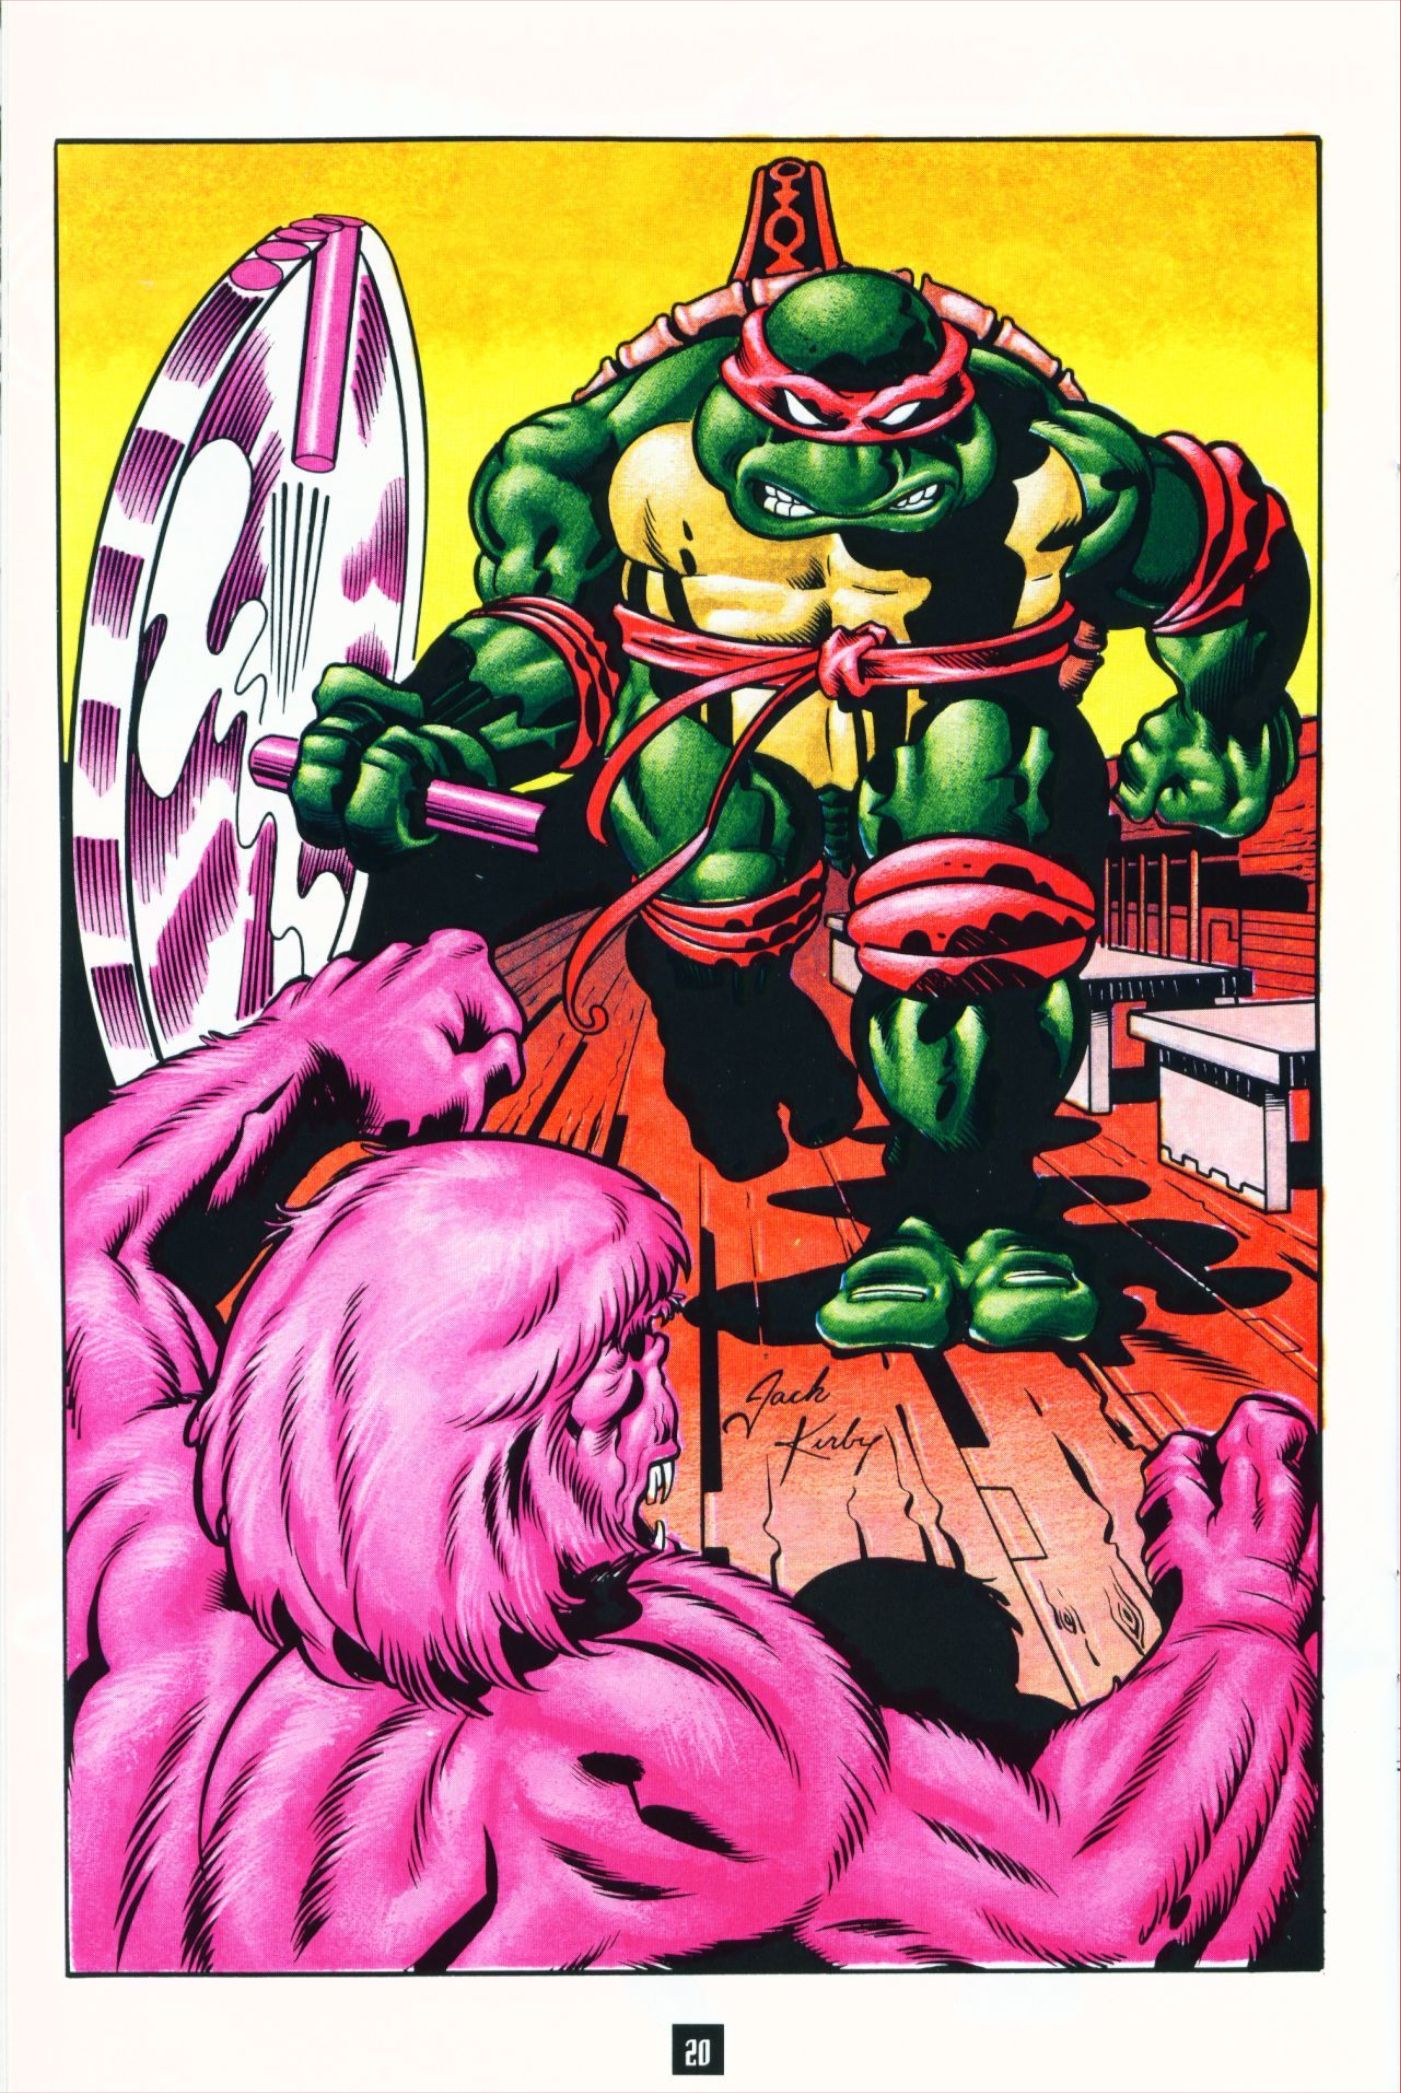 TMNT by Jack Kirby and Mike Thibodeaux